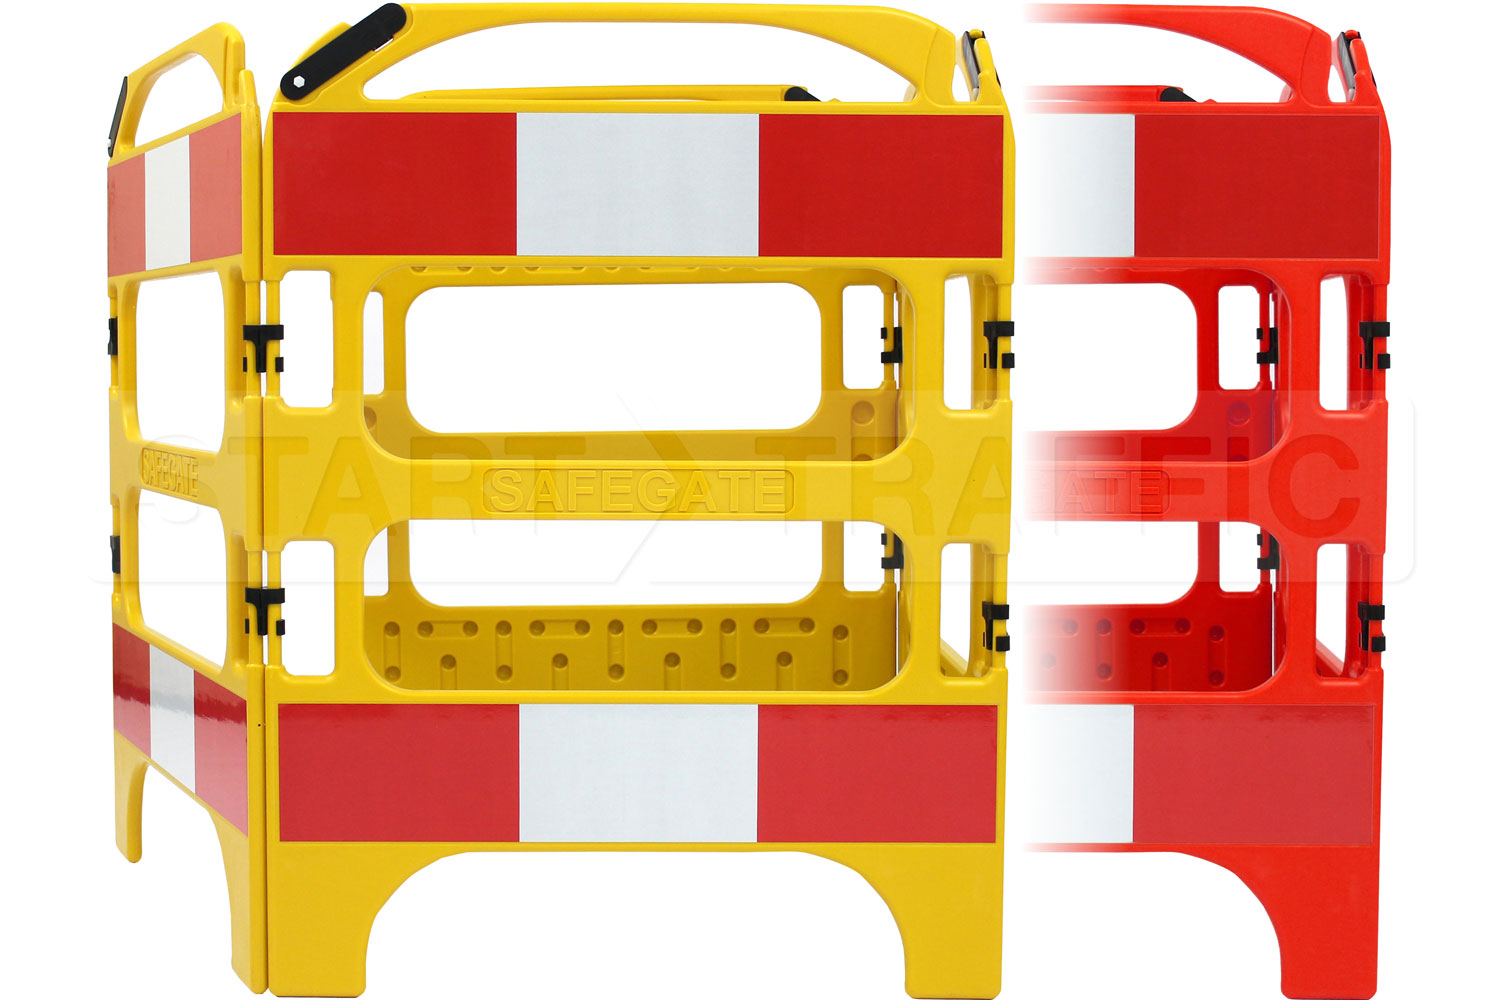 Red and Yellow Safegates available as standard